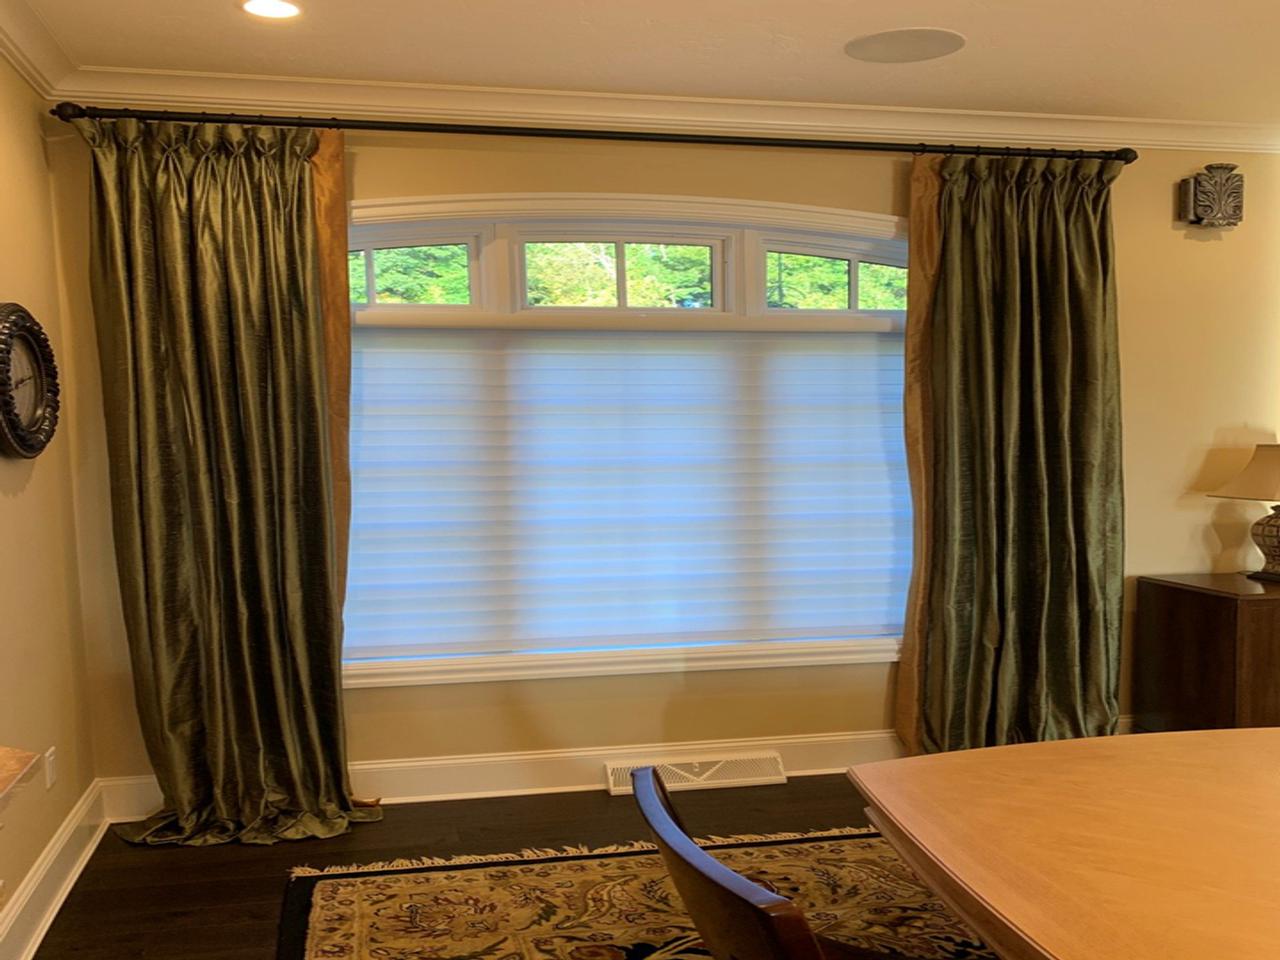 Blinds and drapes on dining room window